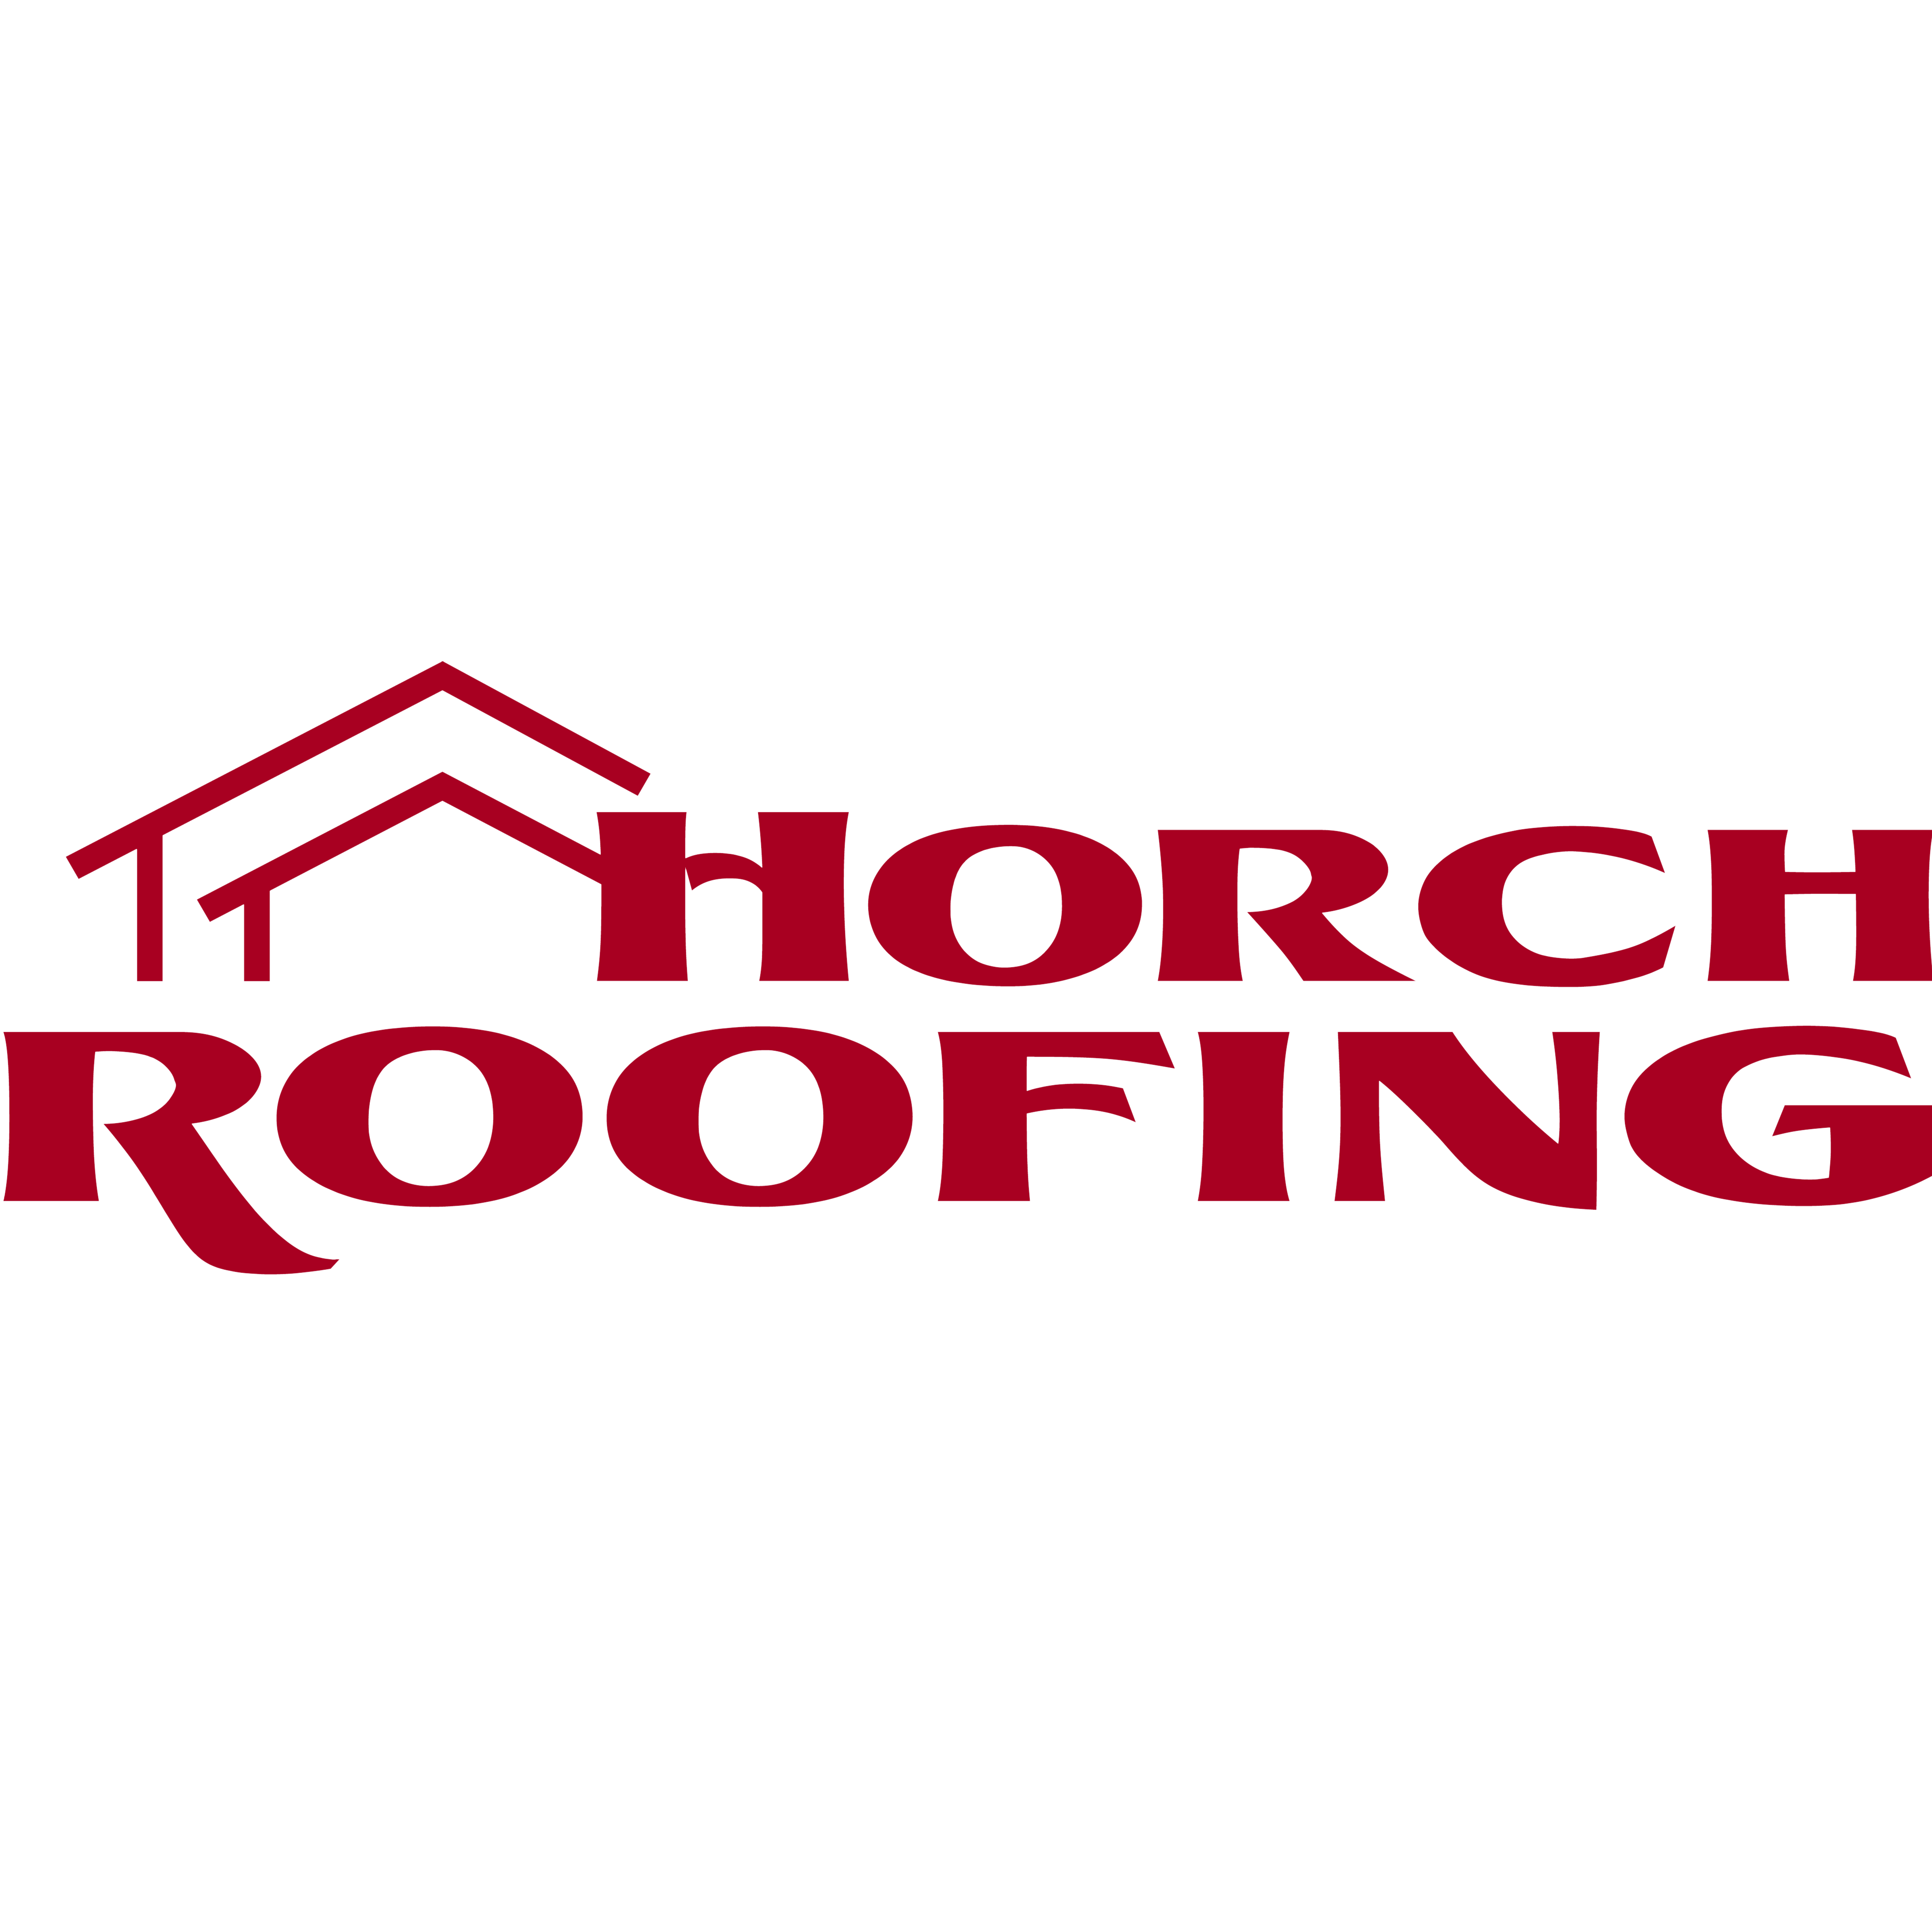 Peter Horch, Owner, Horch Roofing